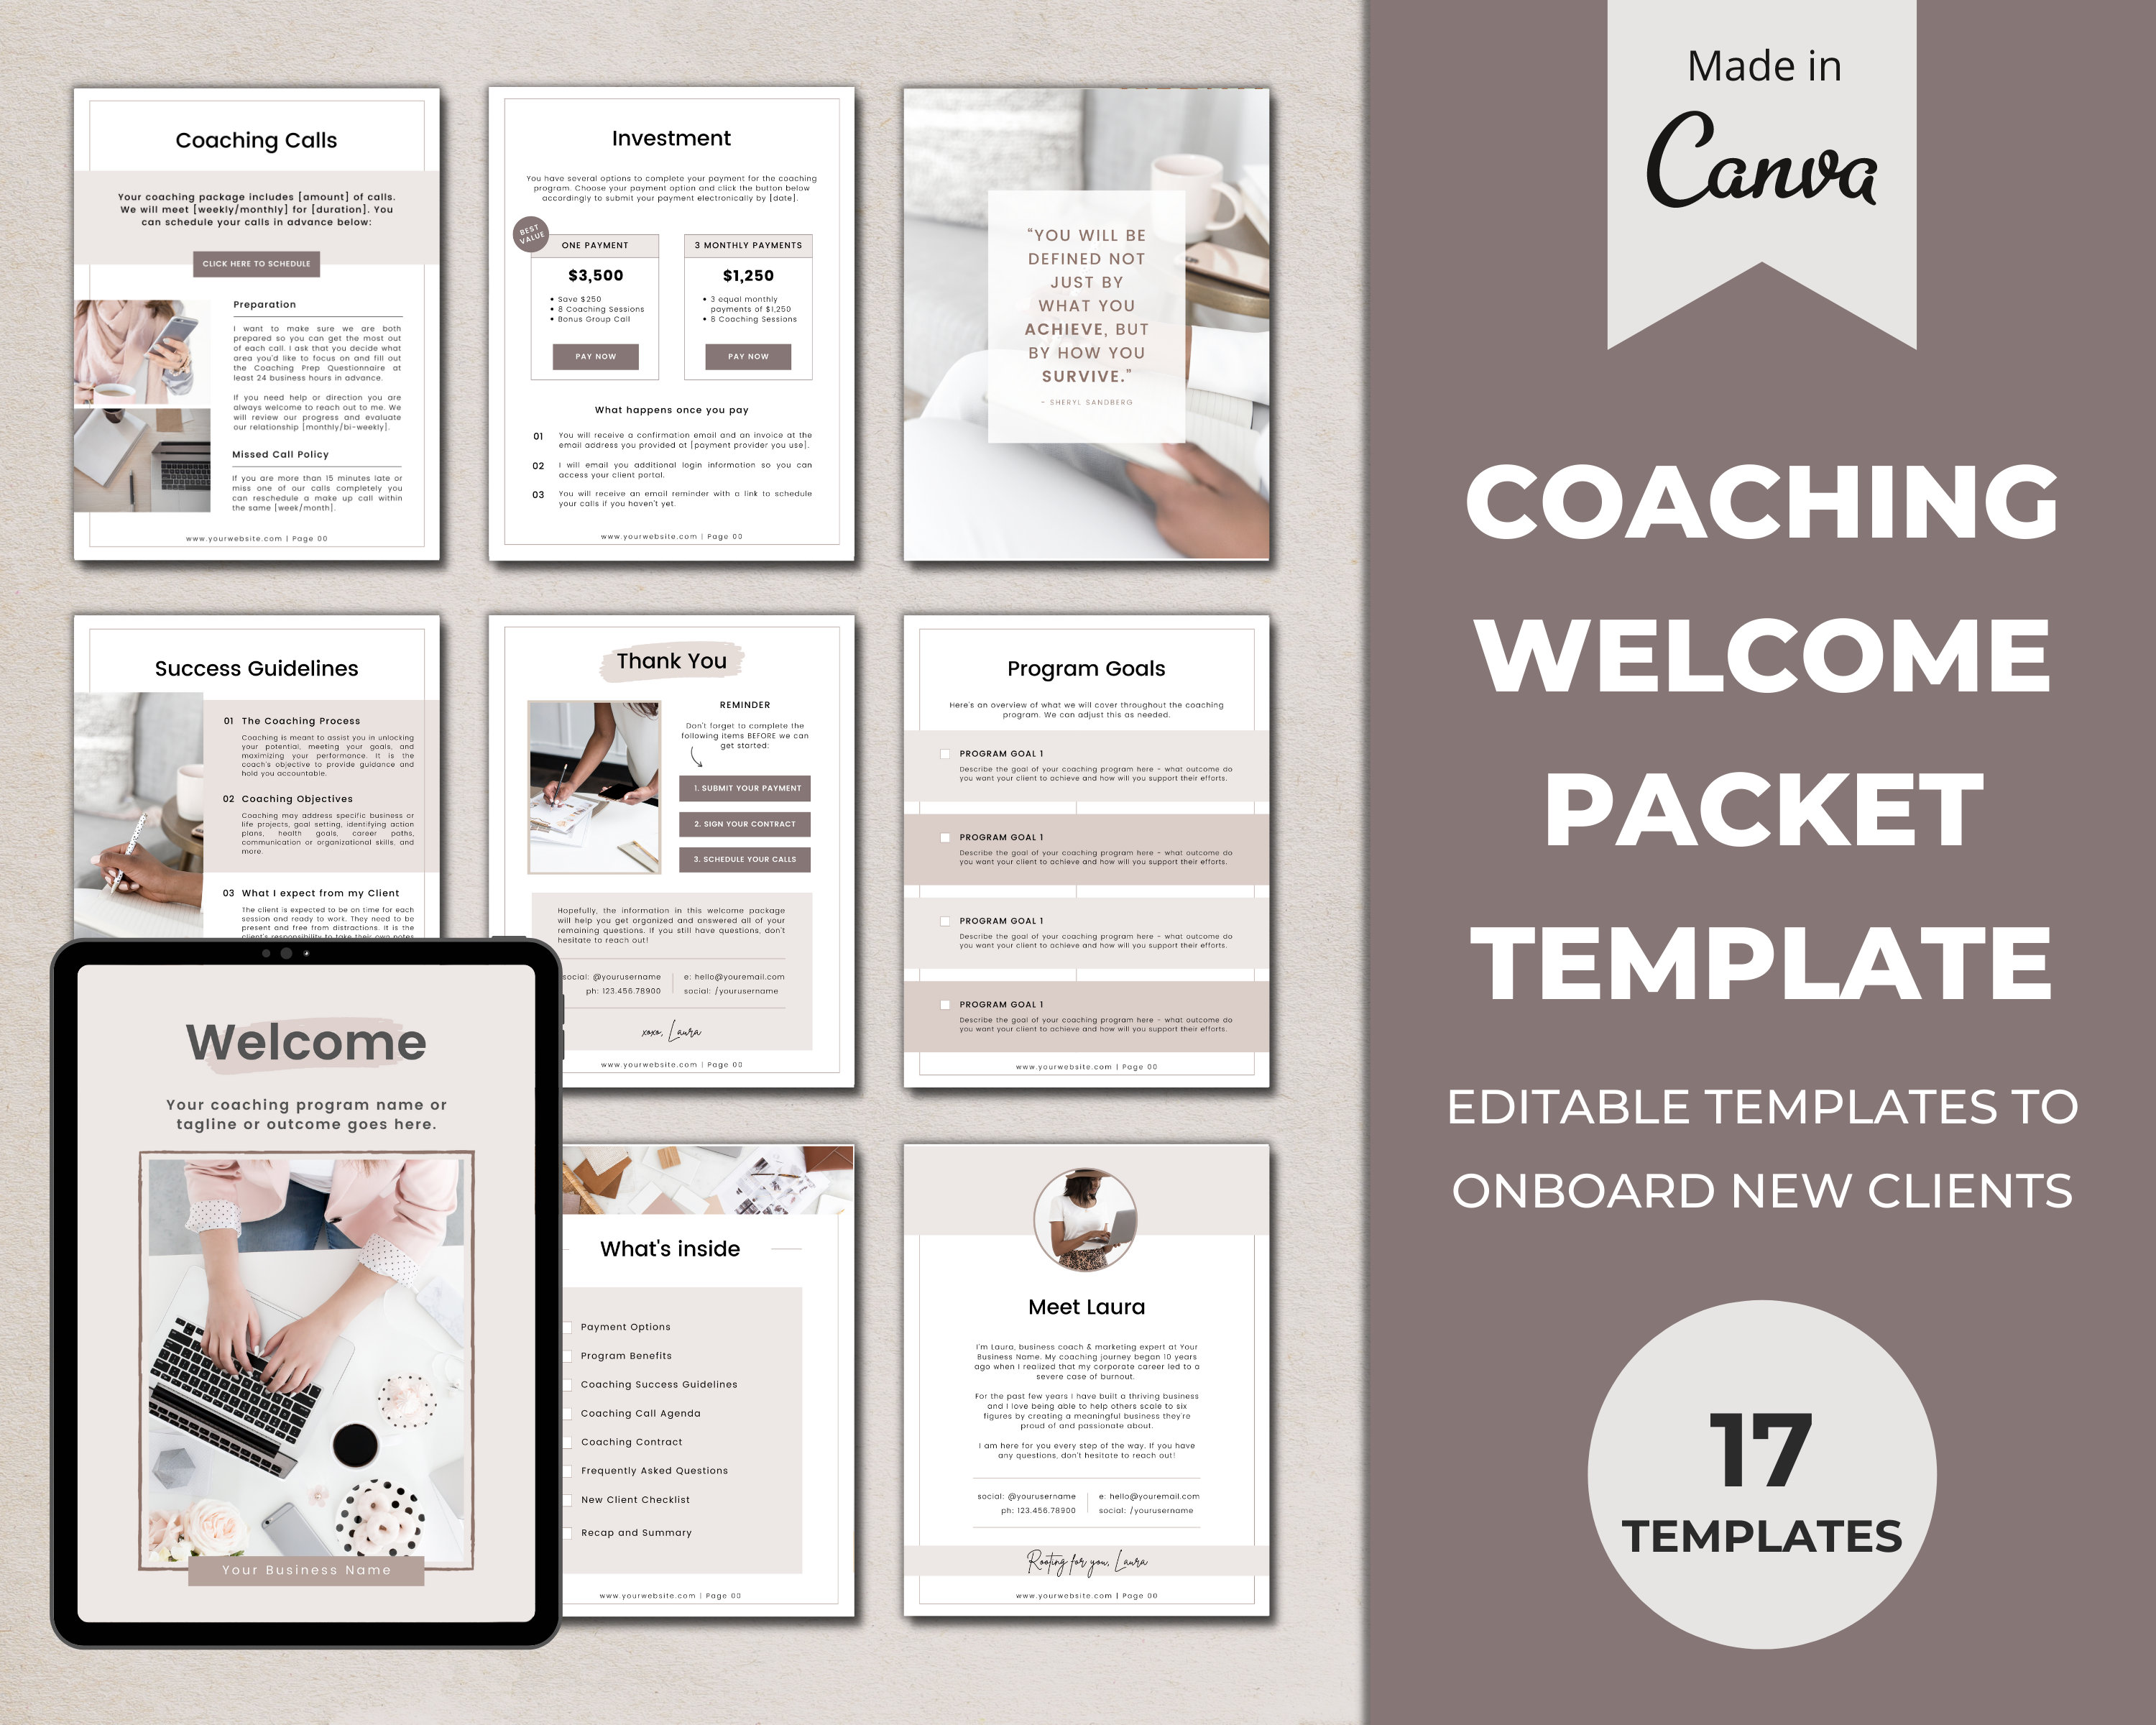 Coaching Client Welcome Package Onboarding Canva Template - Etsy